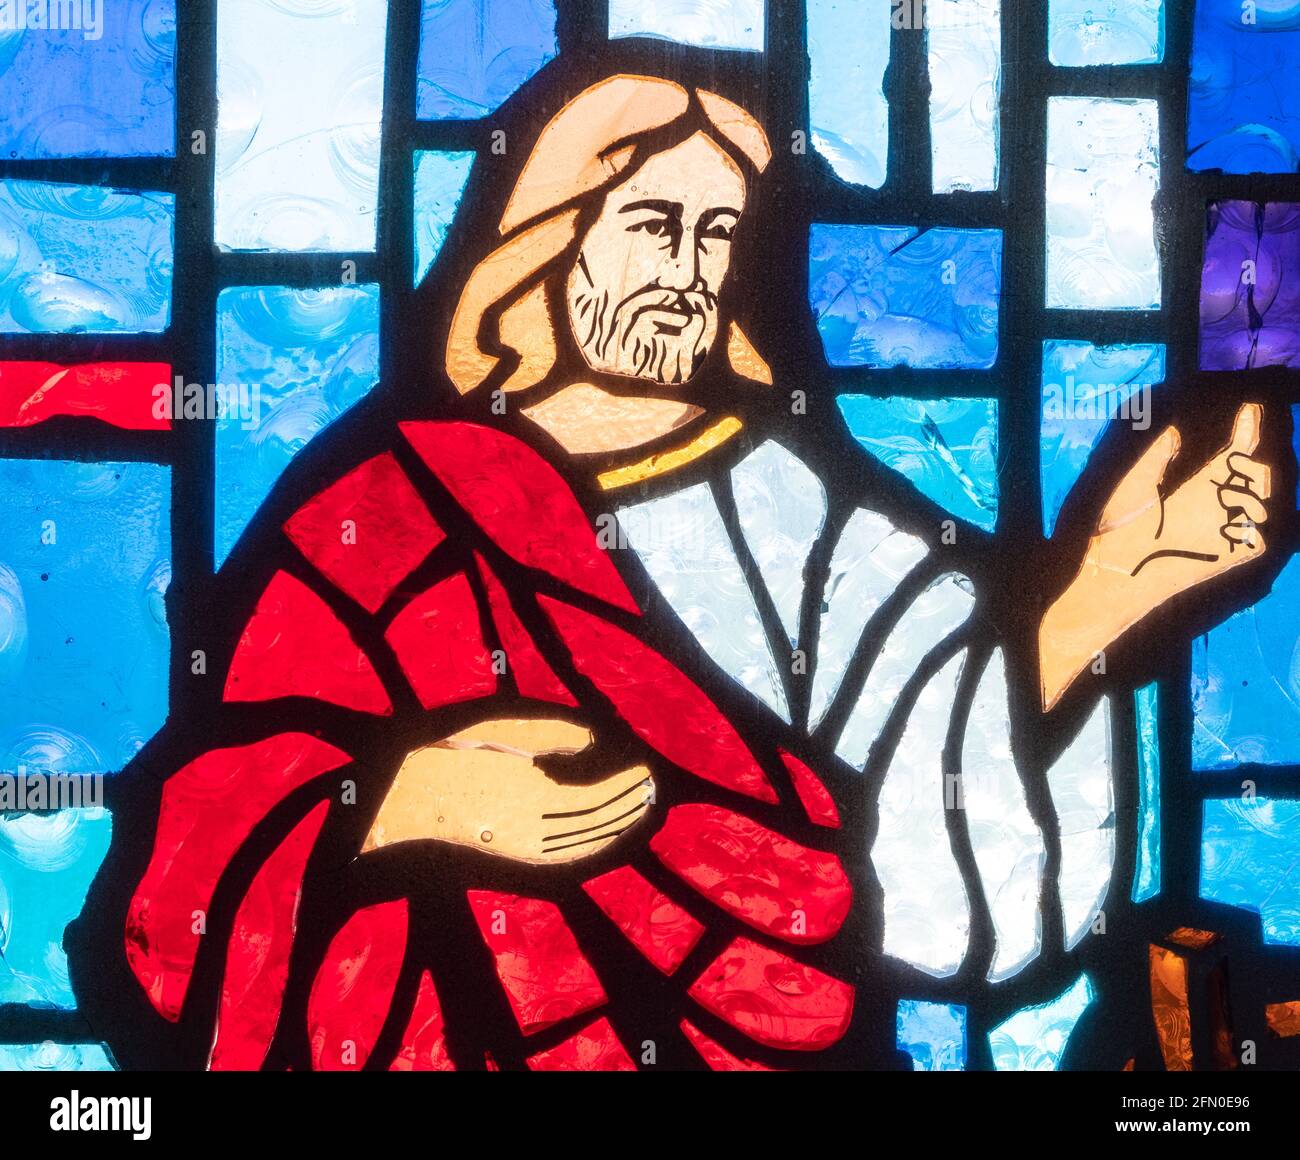 Stained glass in the Christian church with the image of Jesus Stock Photo